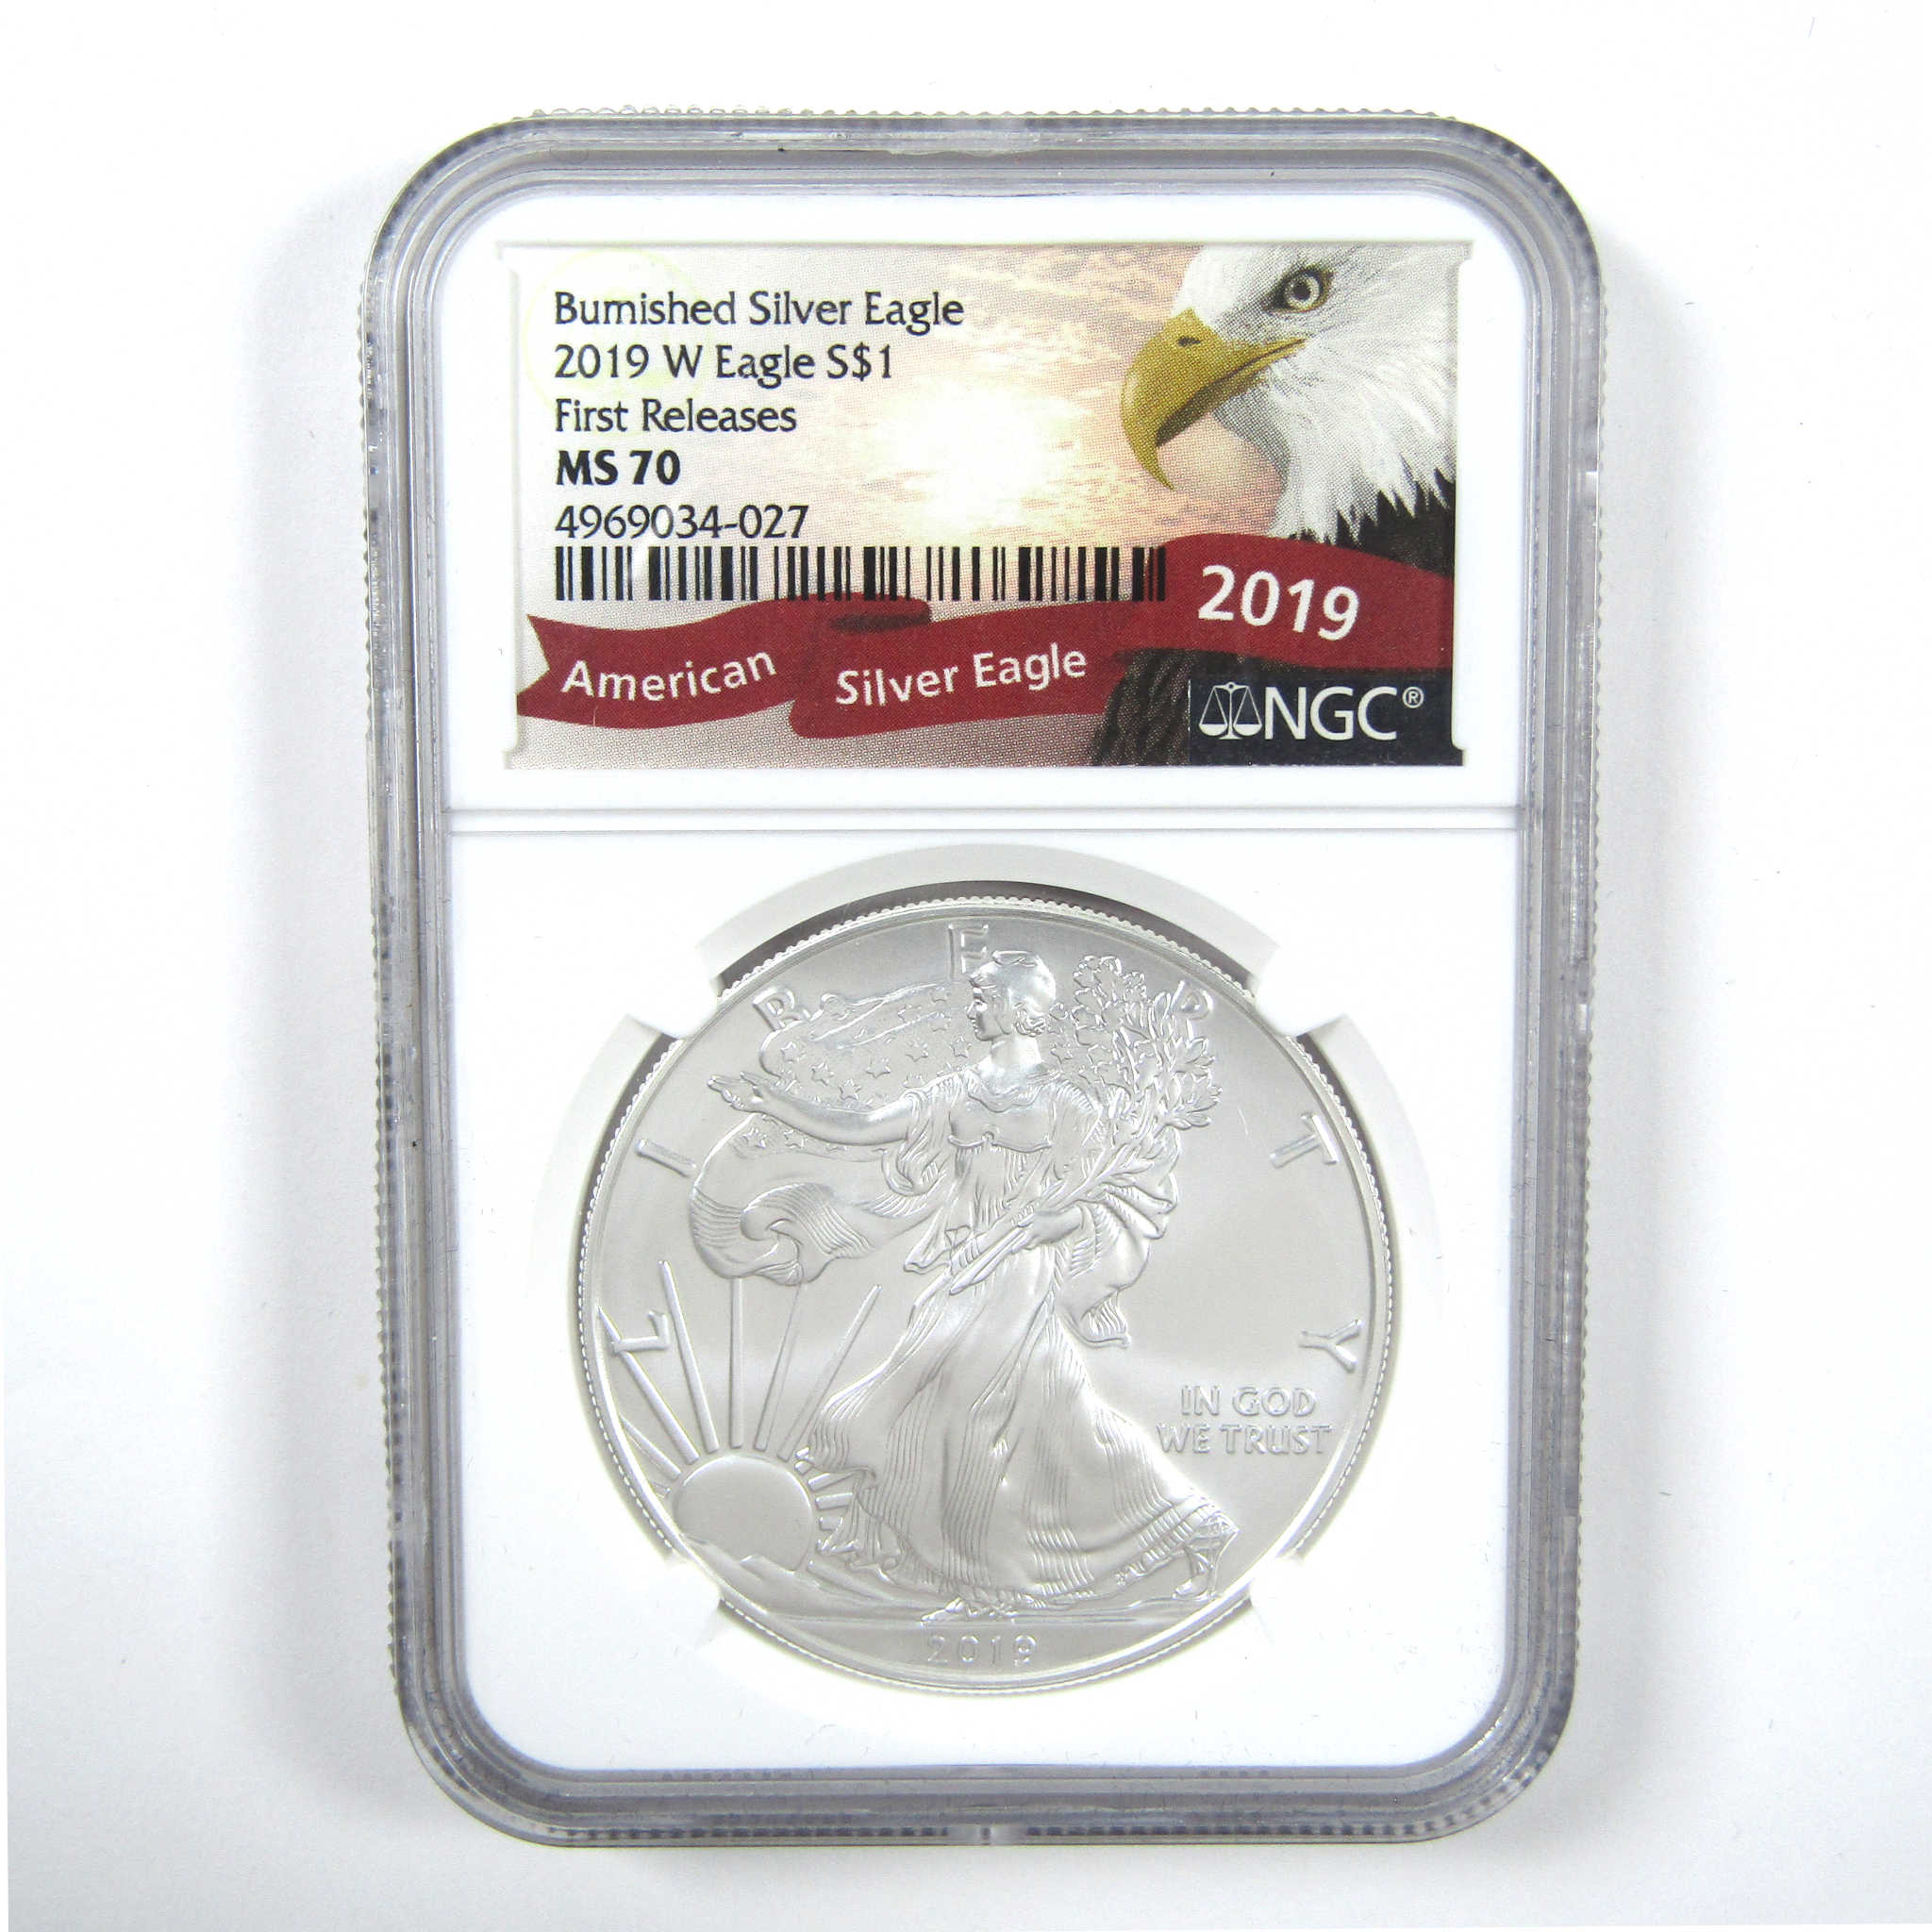 2019 W American Silver Eagle MS 70 NGC $1 First Releases SKU:CPC6877